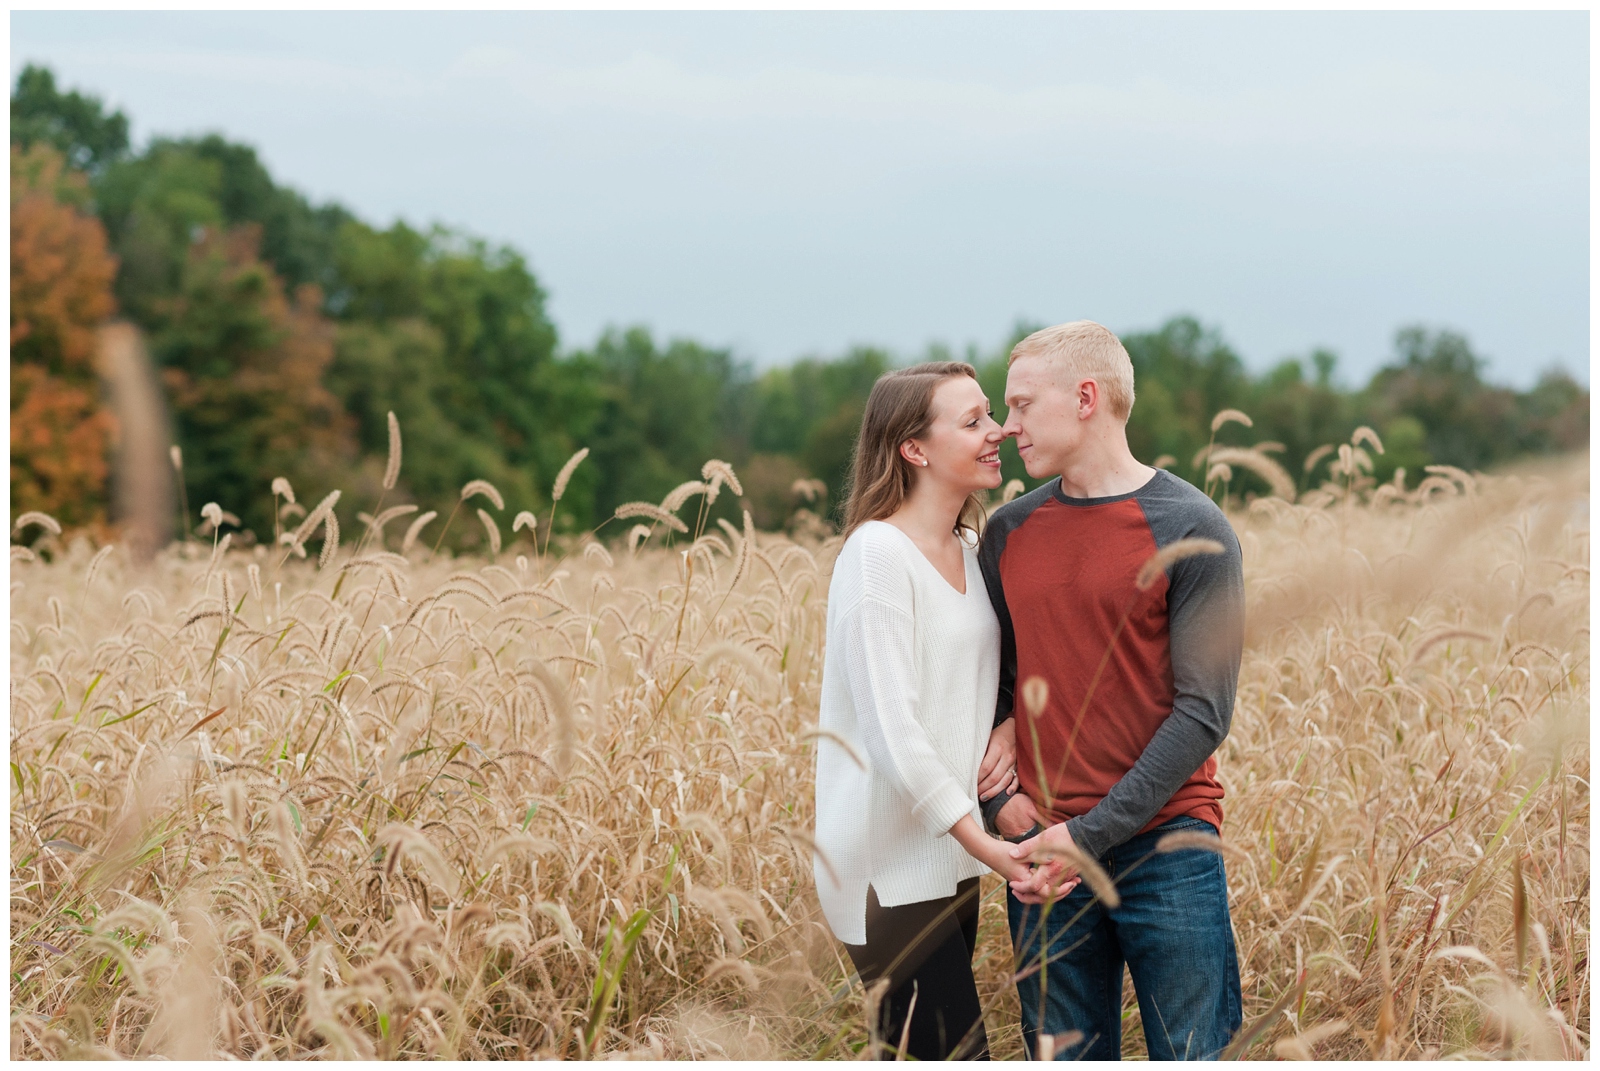 engaged couple snuggling in and holding hands in a wheat field during their Country Engagement Session Sunbury Ohio